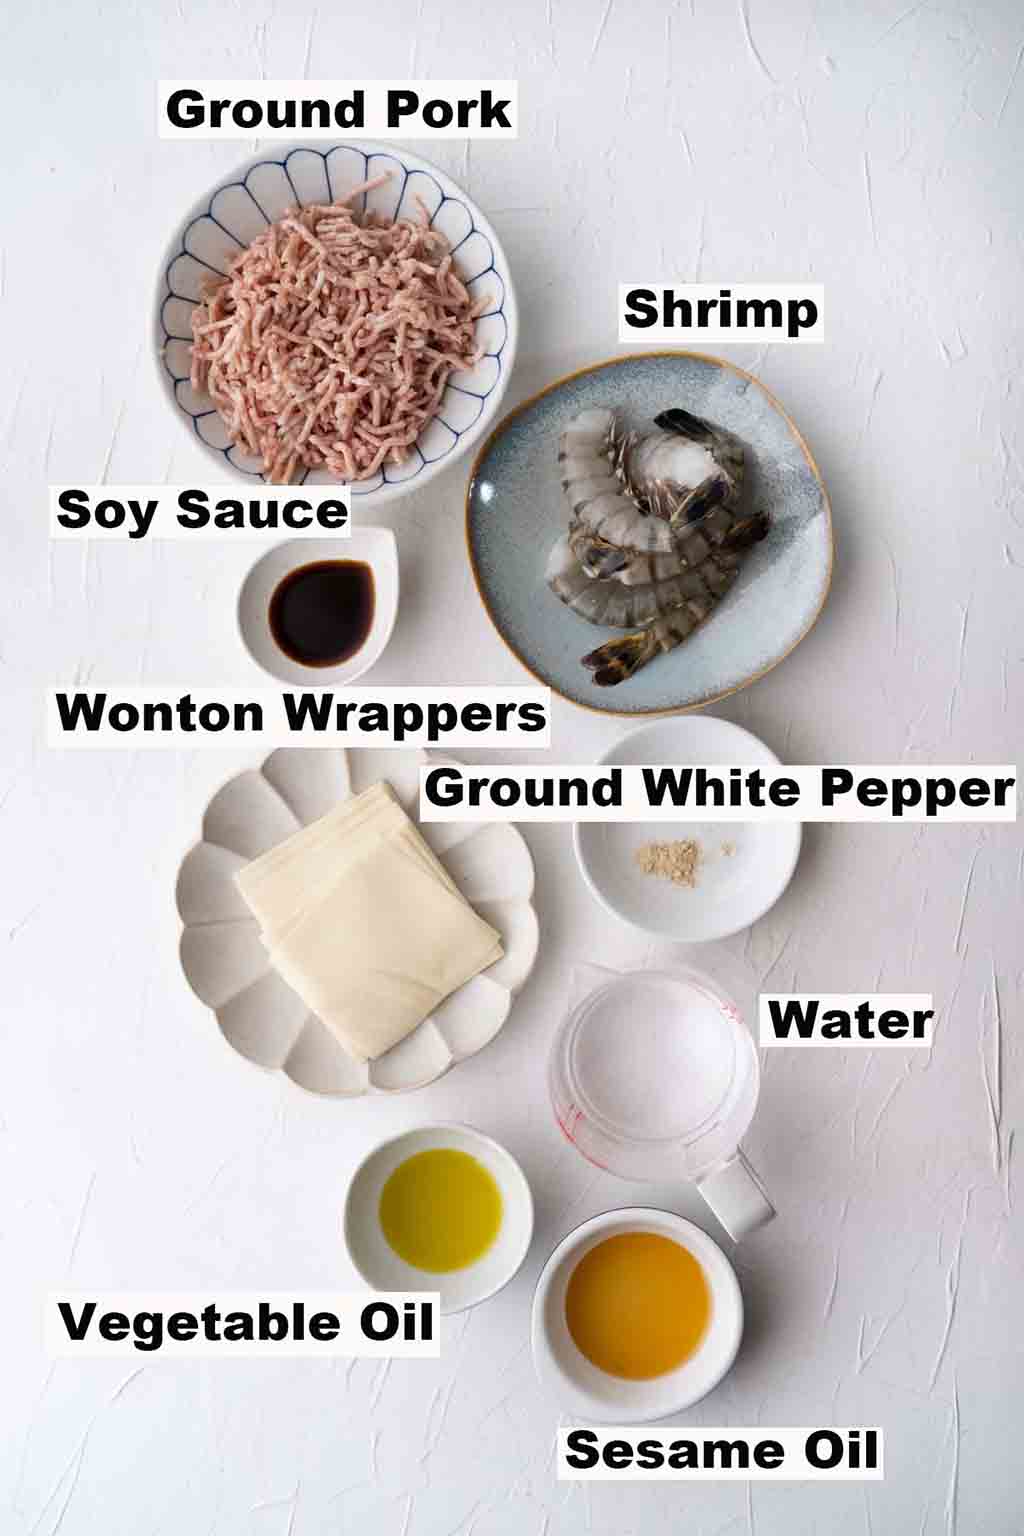 This picture contains ingredients such as ground pork, shrimp, soy sauce, wonton wrappers, ground white pepper, water, vegetable oil and sesame oil which are needed to make the Fried Wonton recipe.